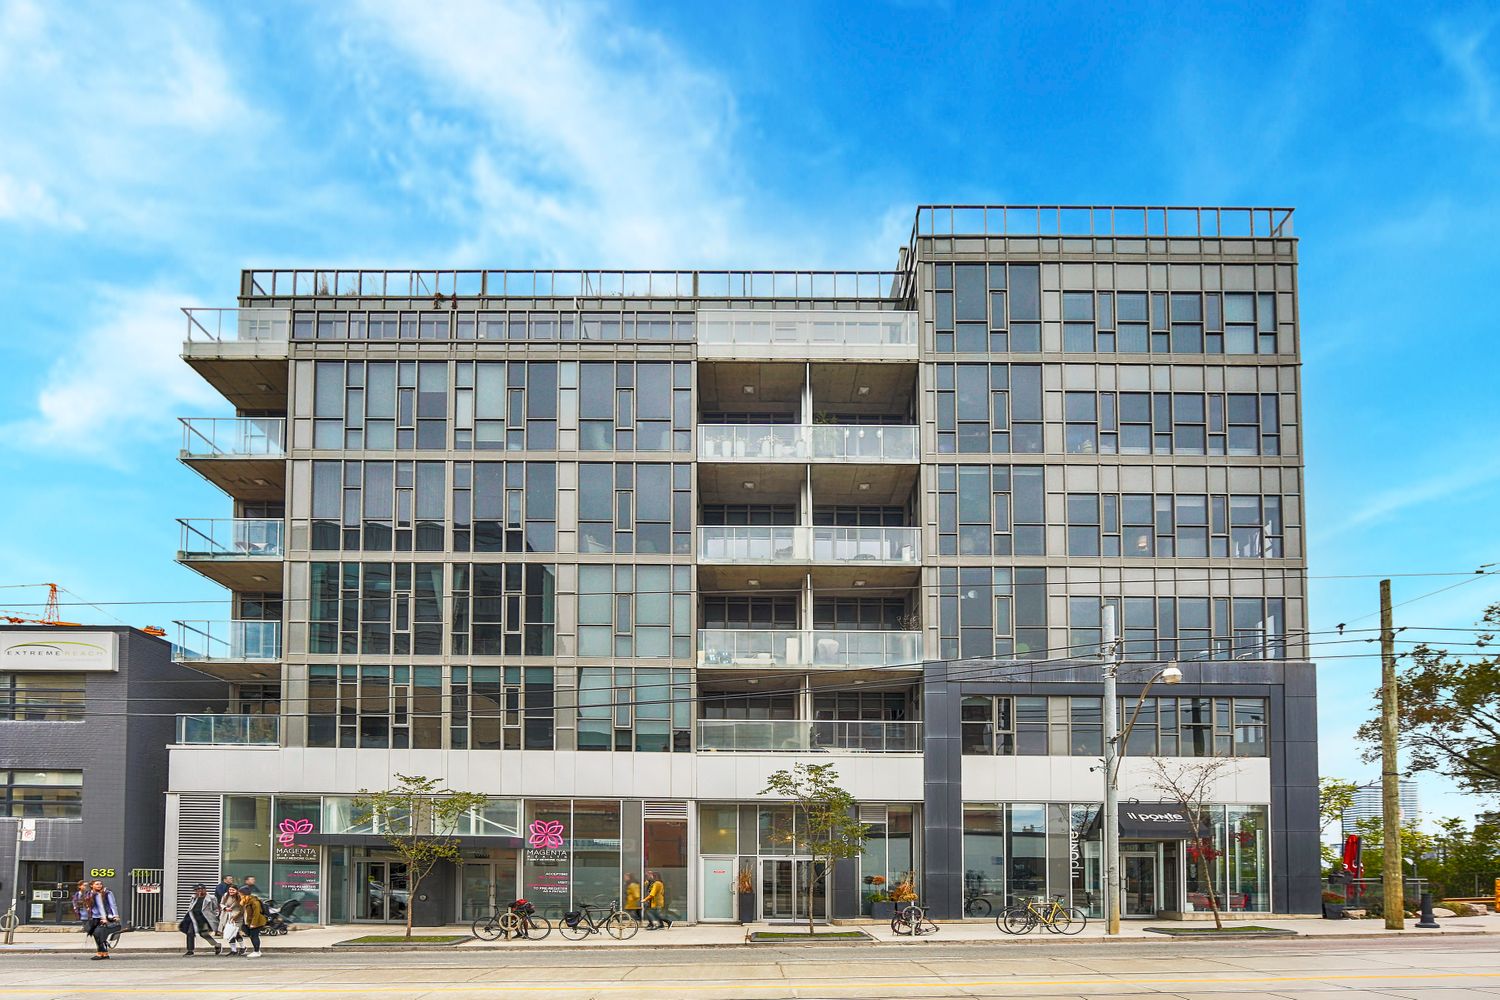 625 Queen Street E. Edge Lofts is located in  East End, Toronto - image #3 of 5